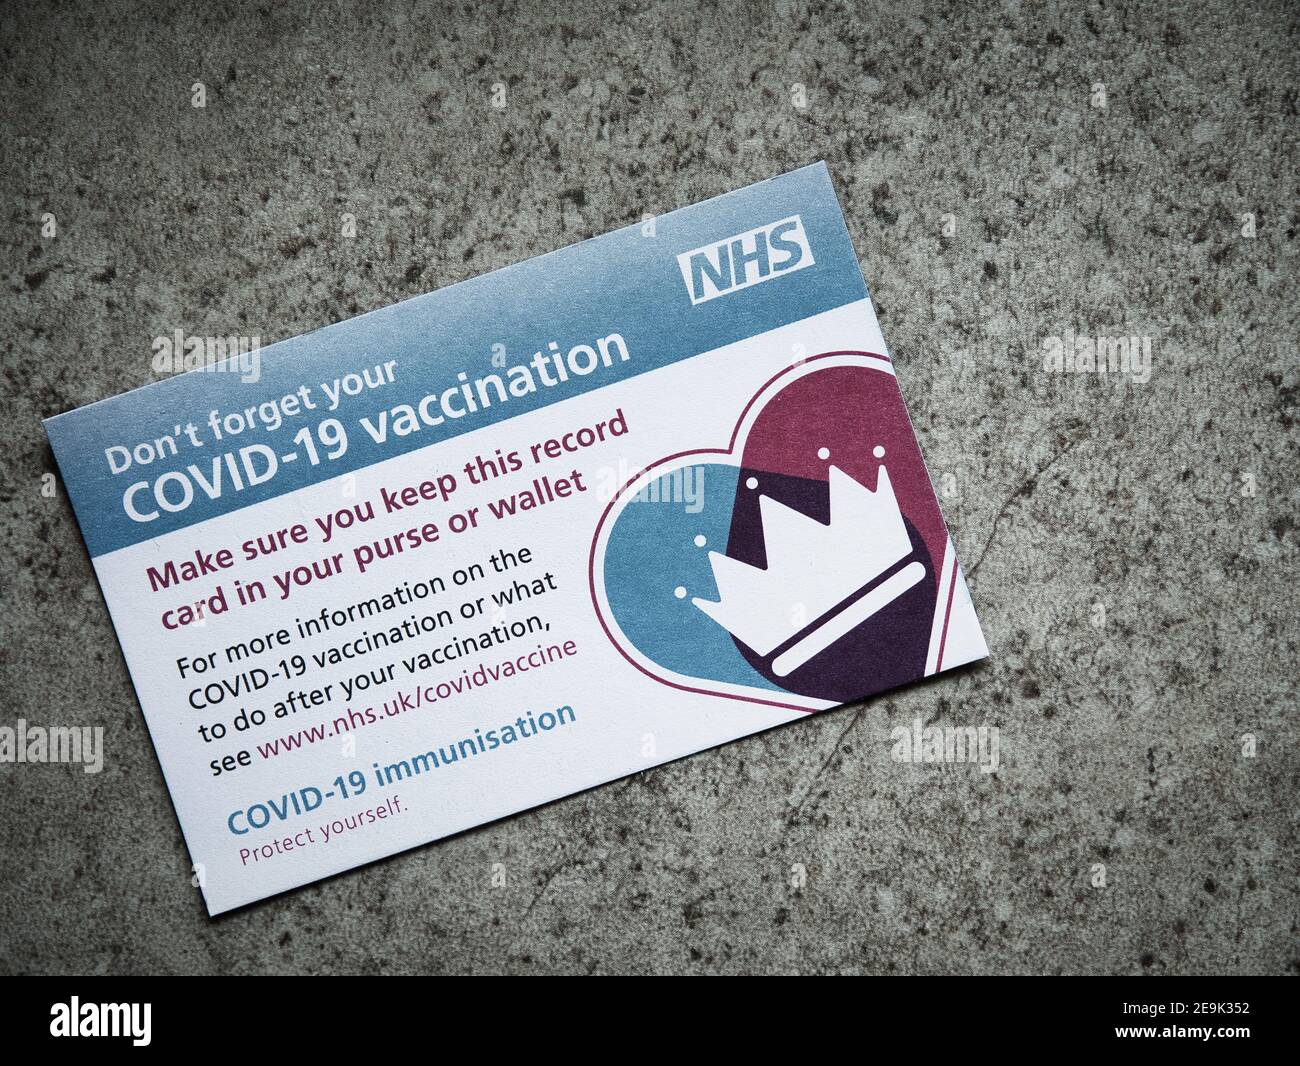 A UK NHS COVID-19 vaccination record card, used to log details of vaccinations given. Stock Photo